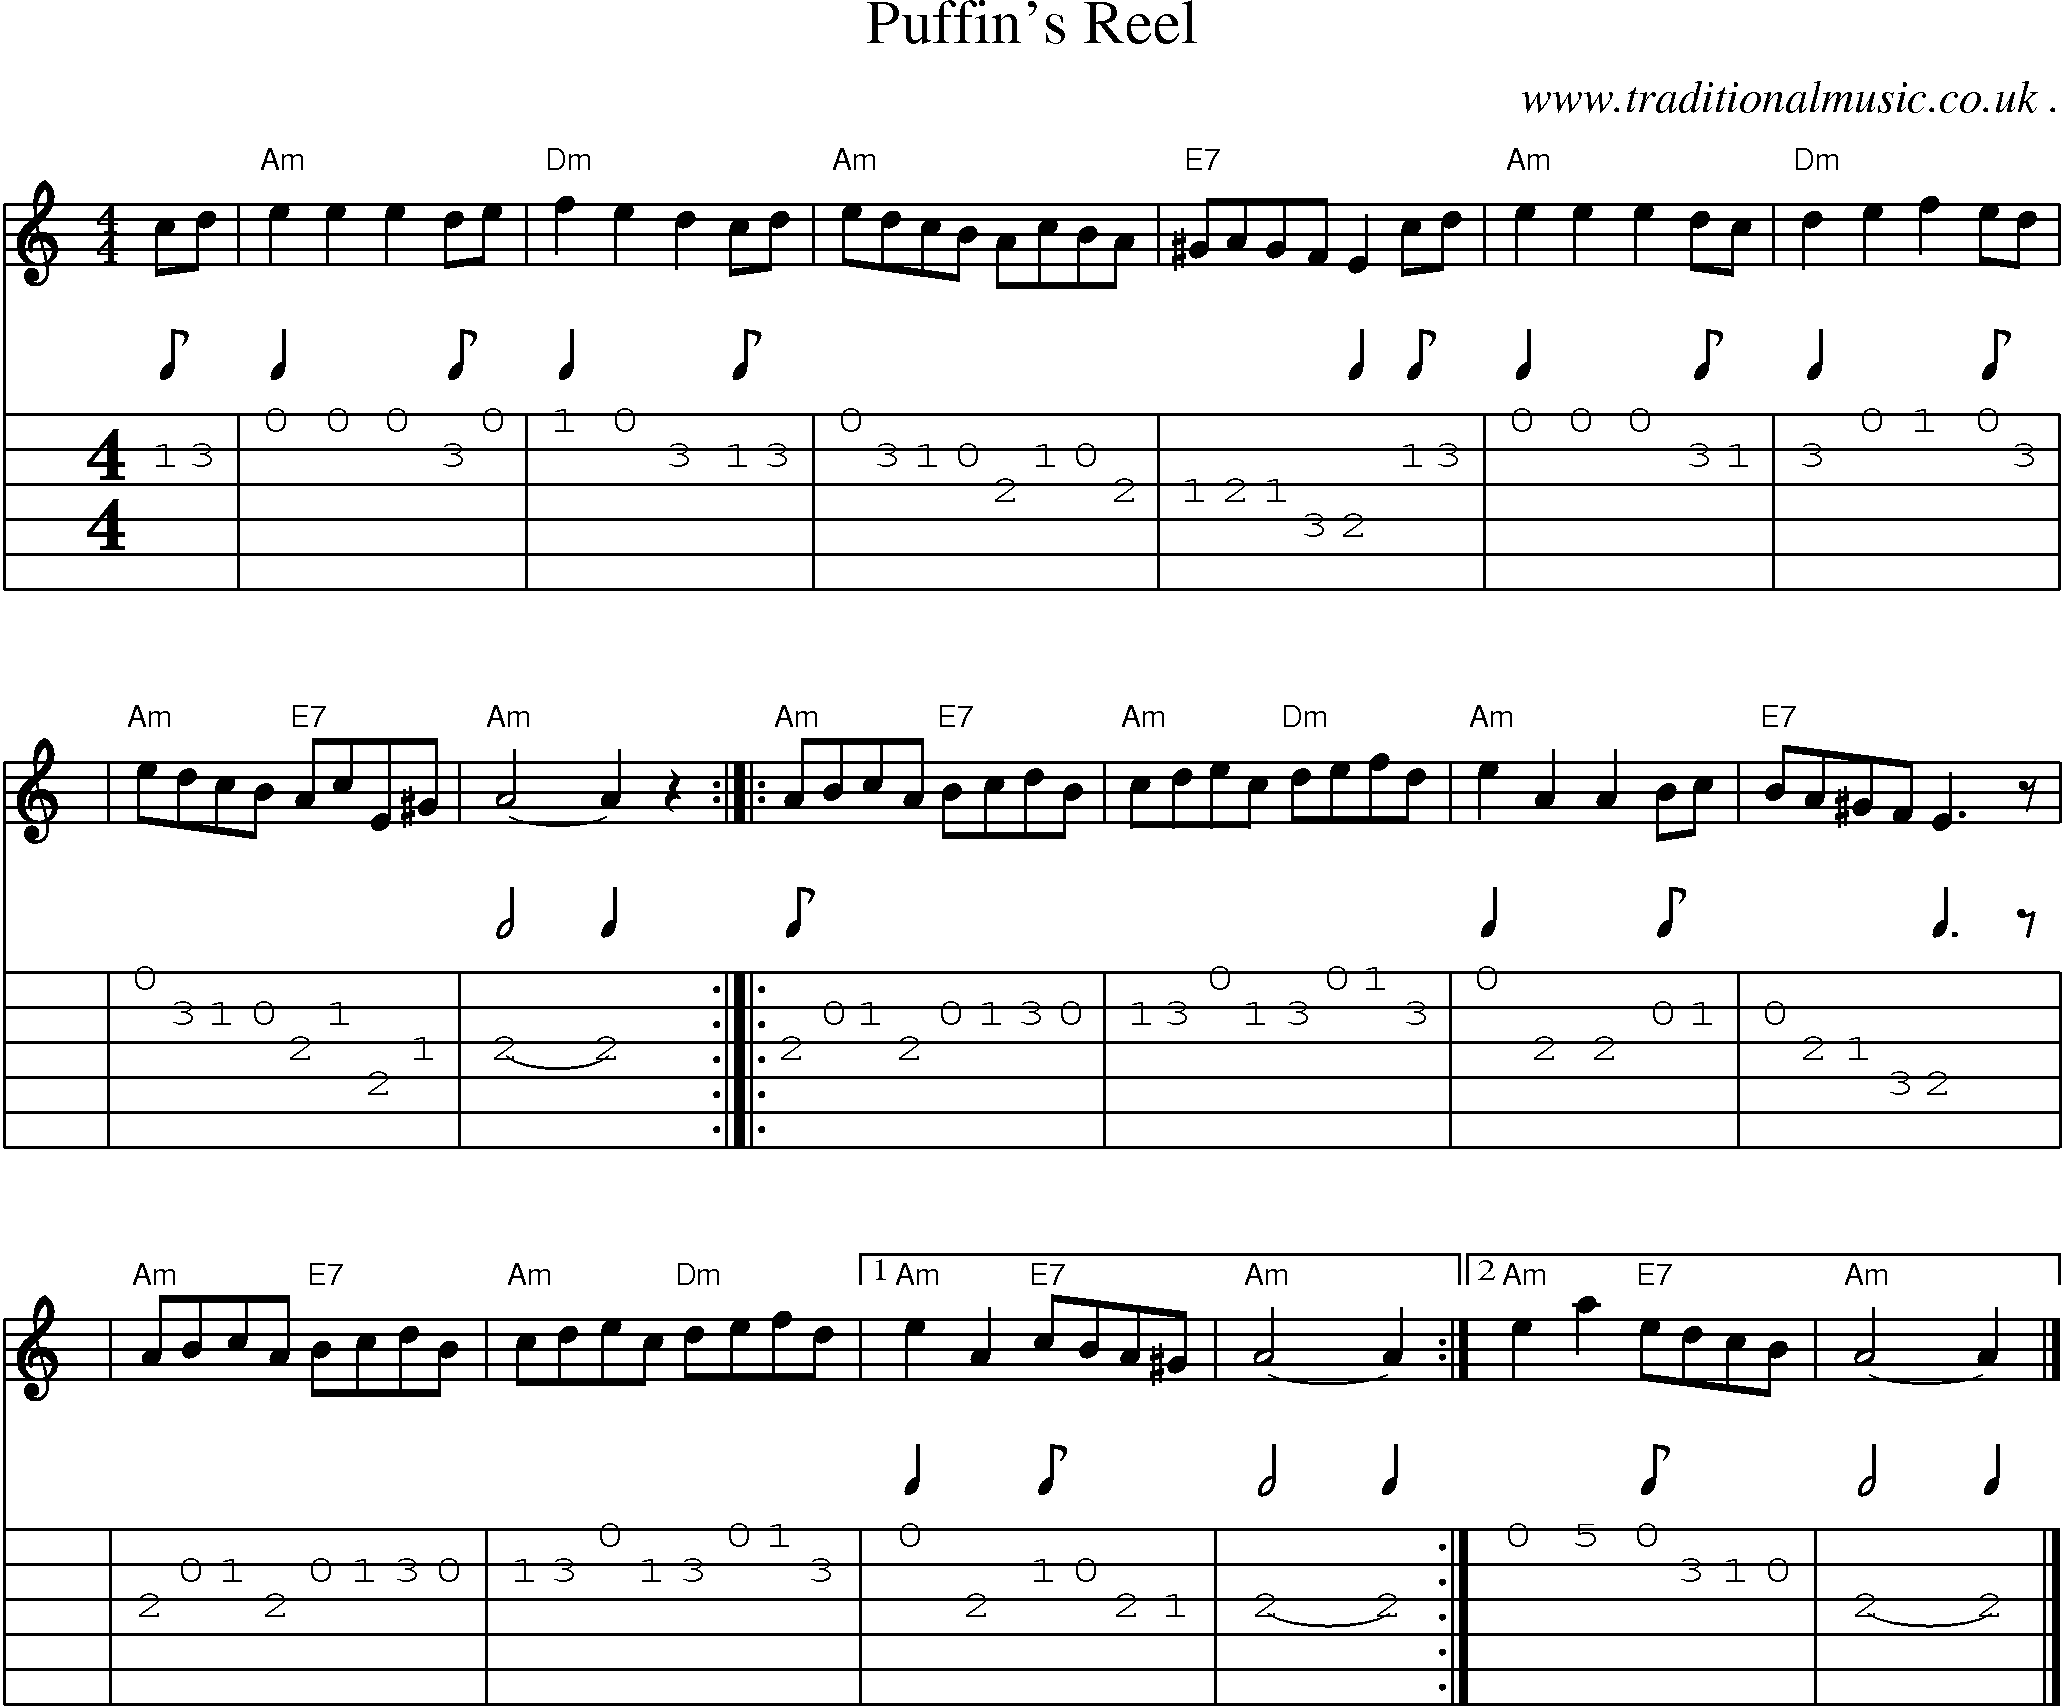 Sheet-music  score, Chords and Guitar Tabs for Puffins Reel